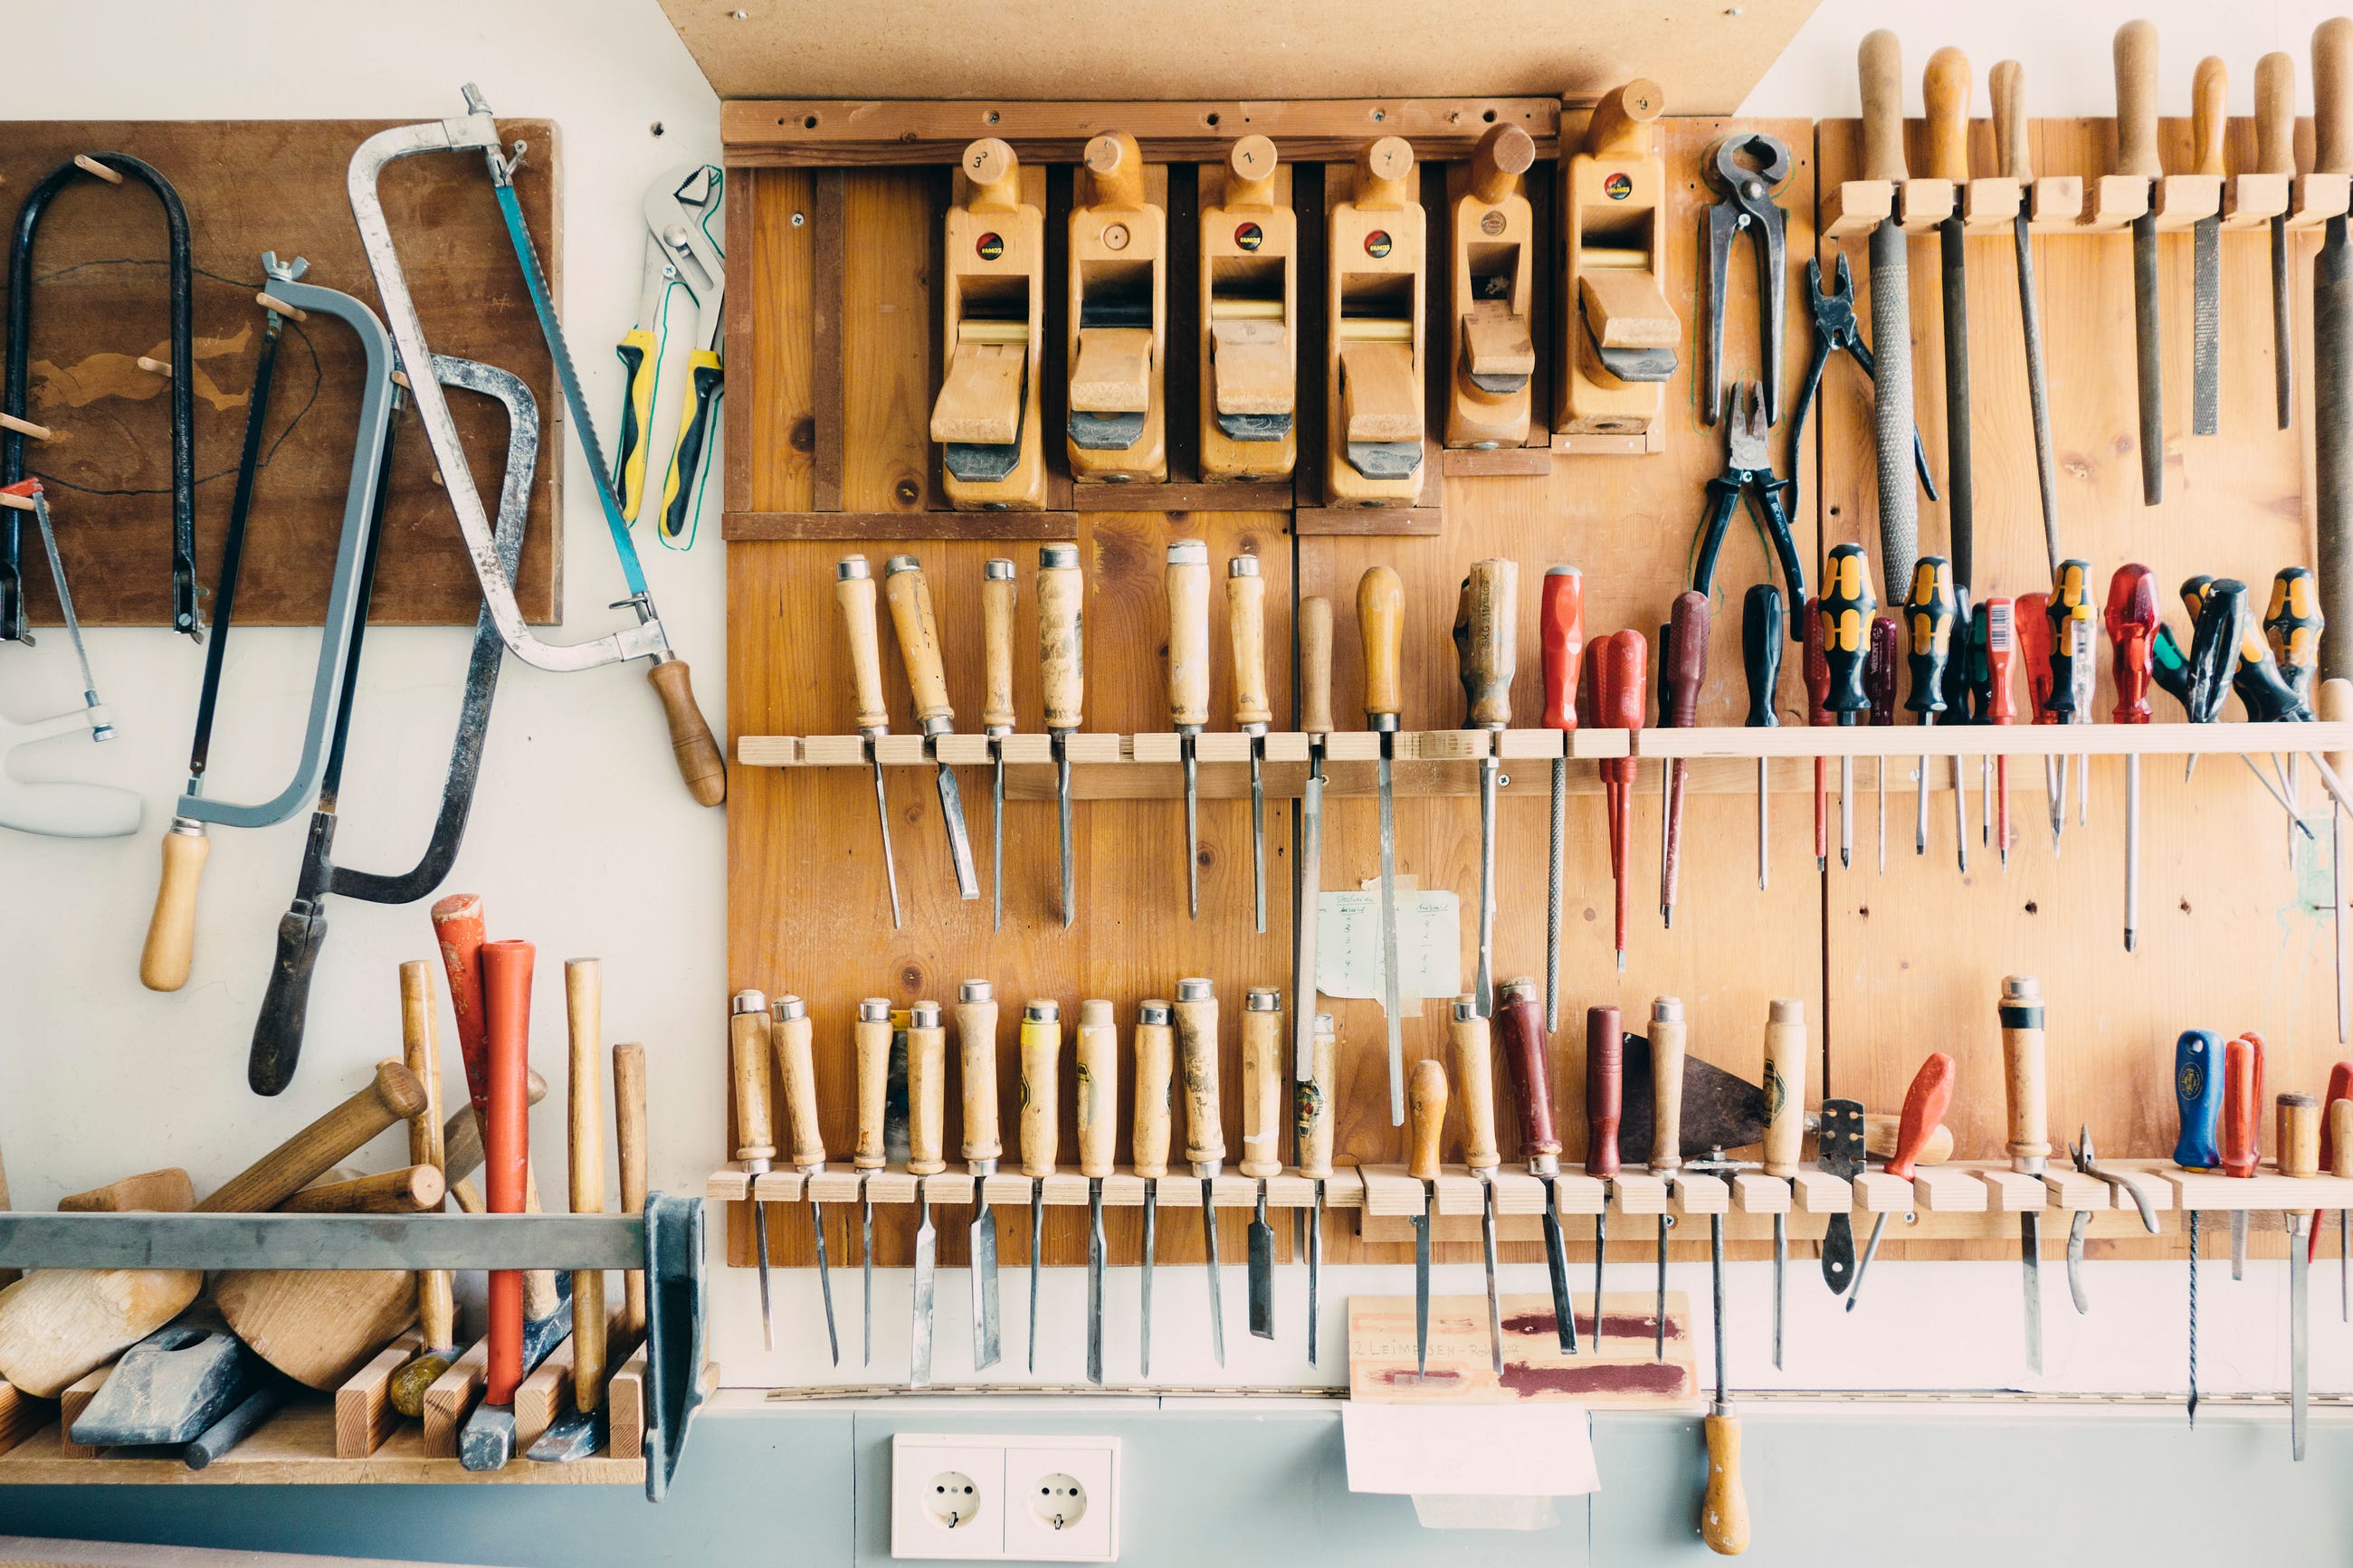 Your Data Science Toolbox — What is Inside?